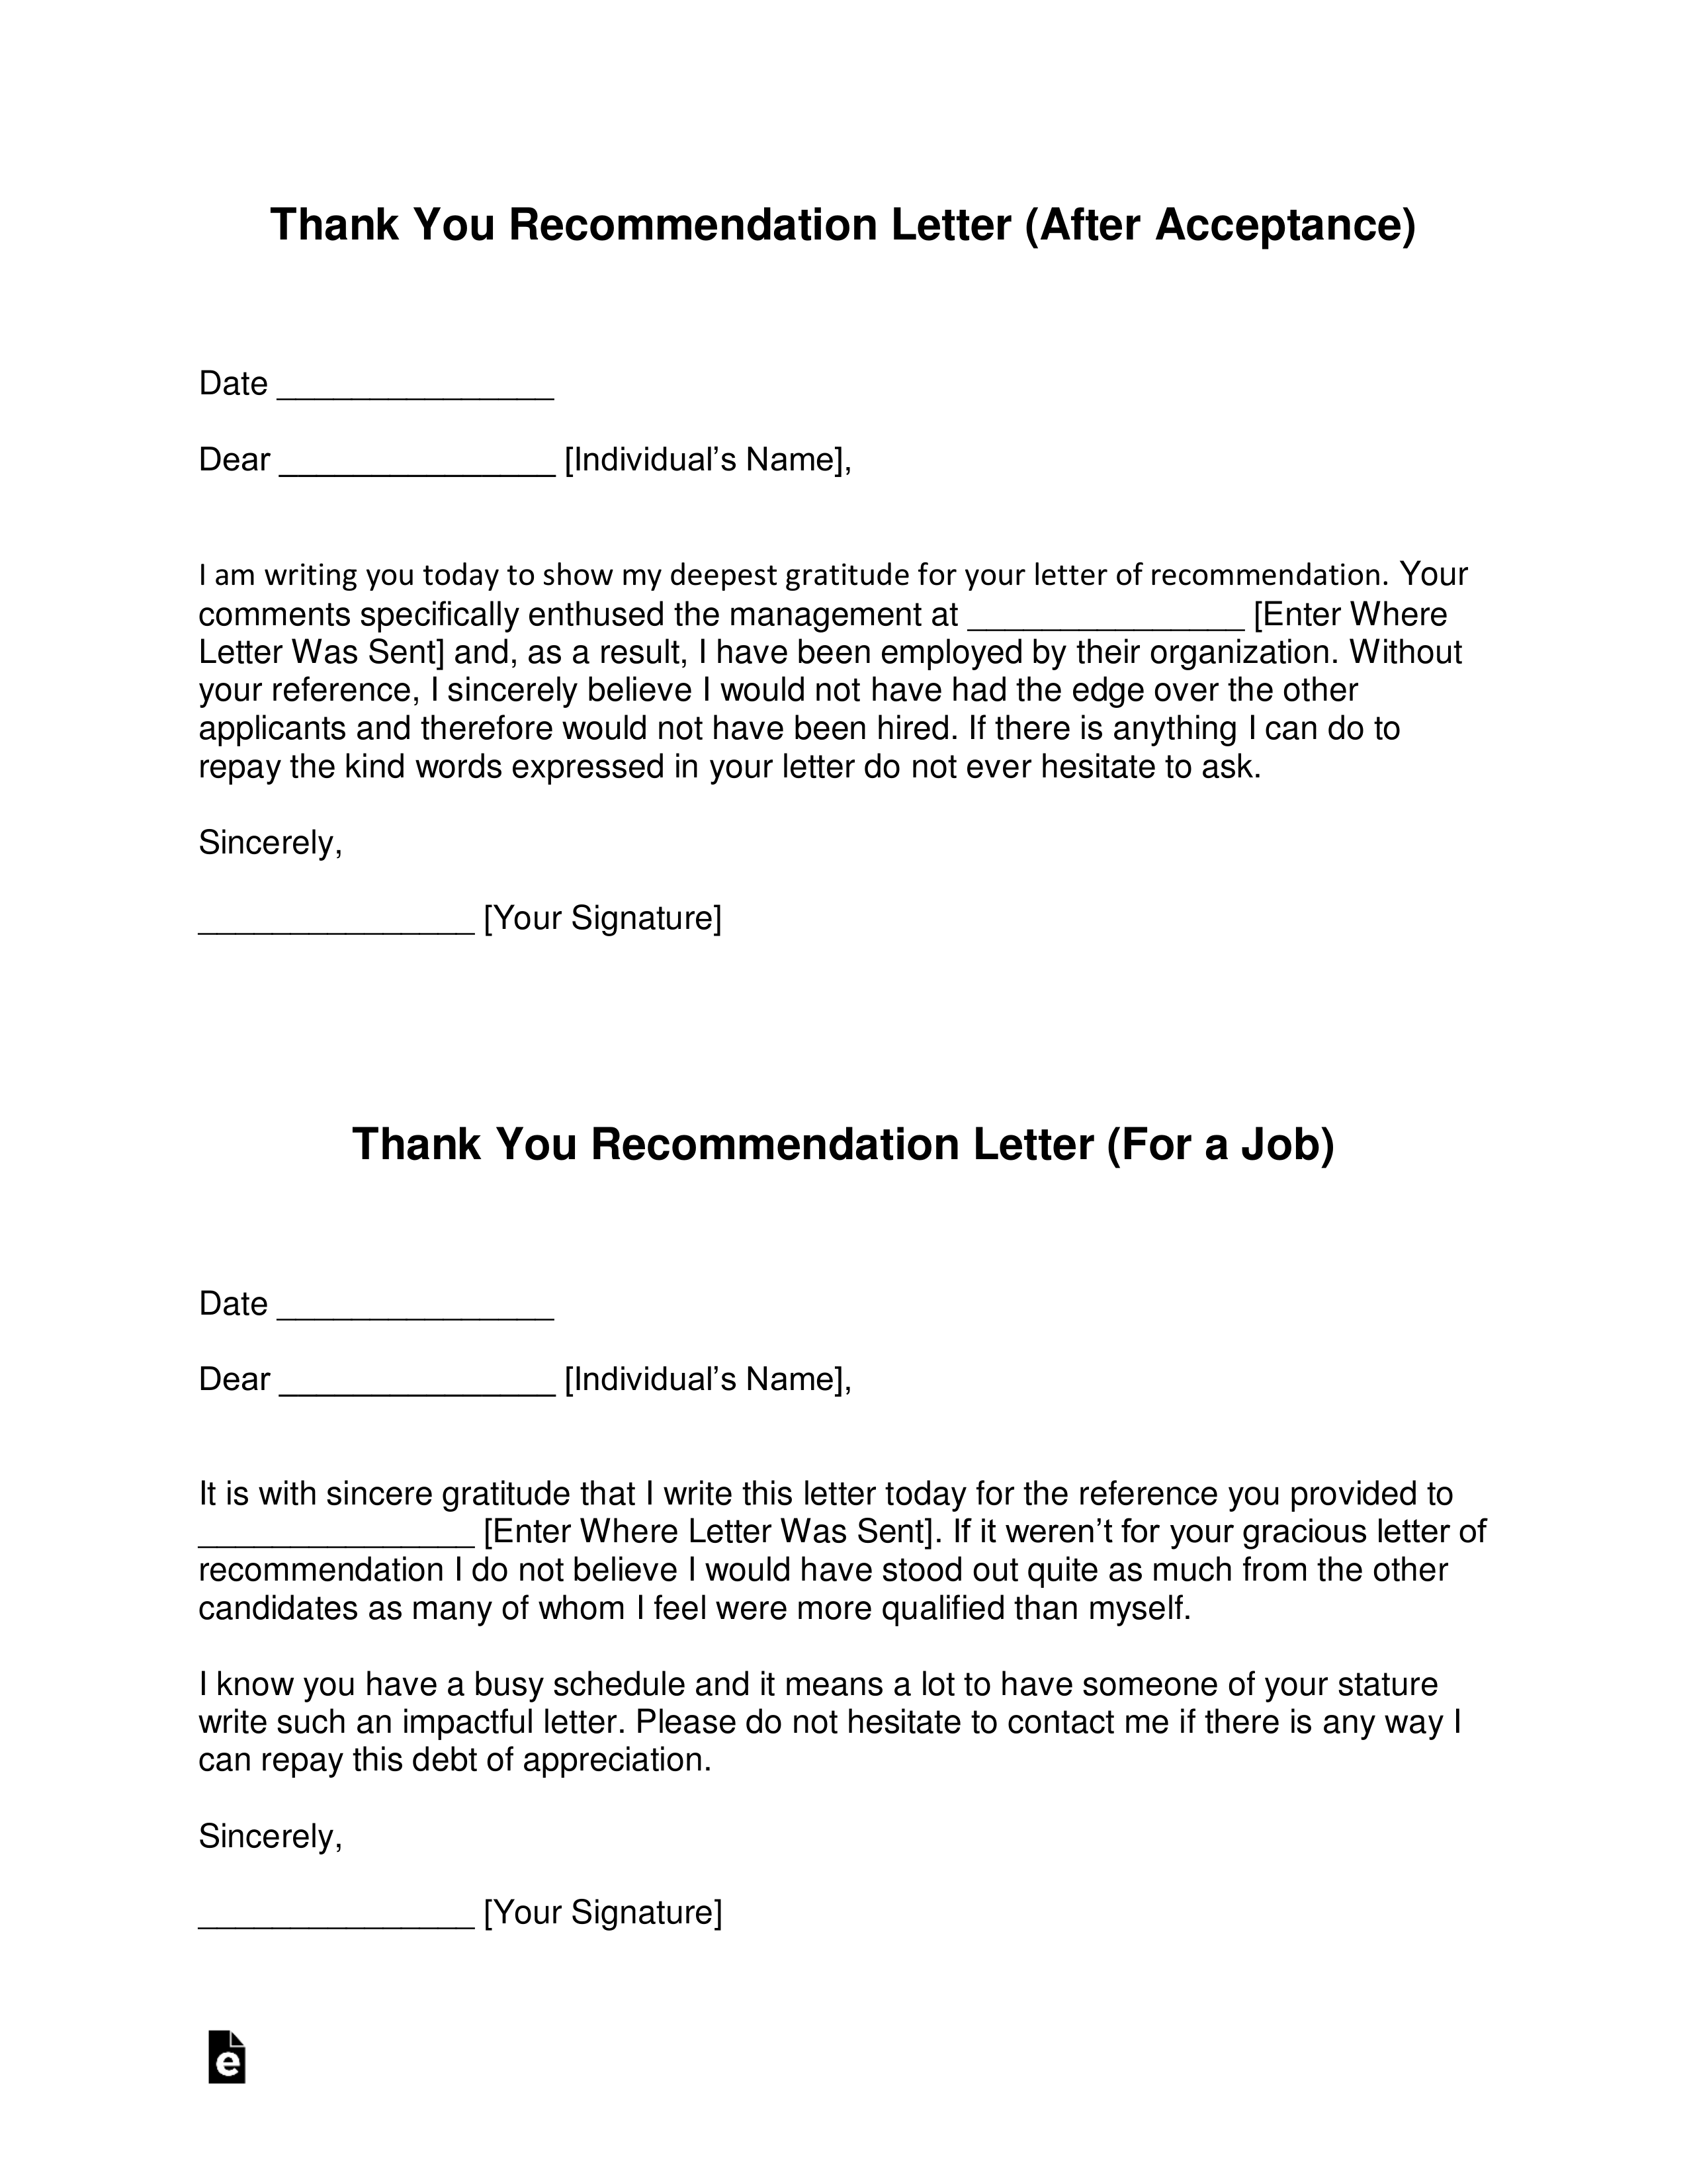 Green Card Recommendation Letter Sample from eforms.com